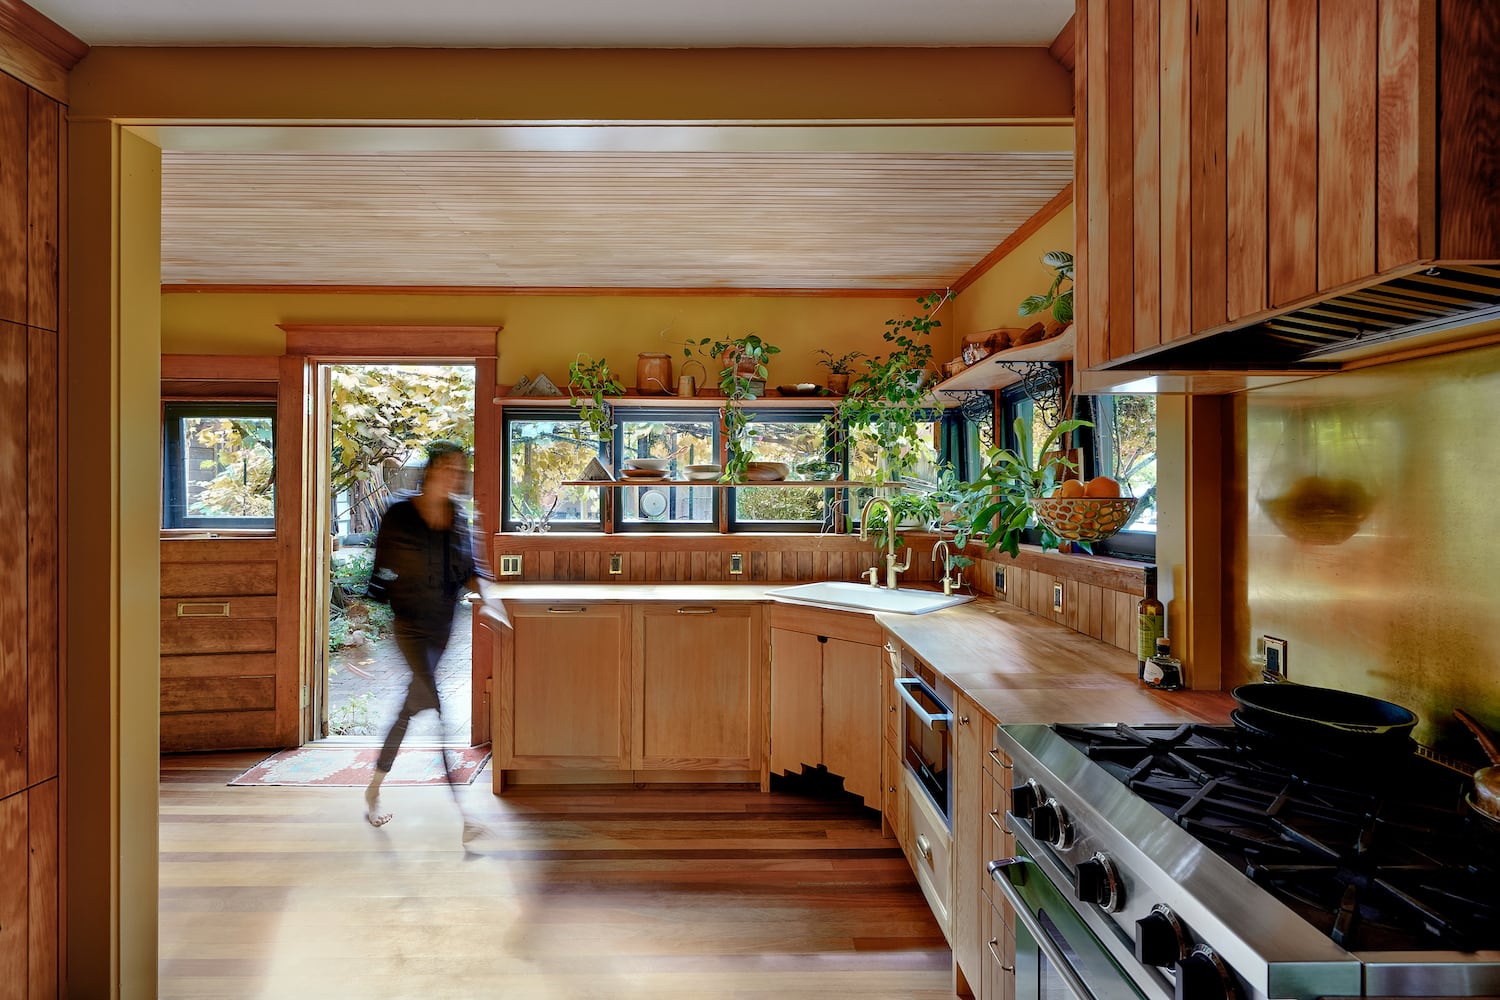 Portland kitchen remodel with reclaimed floors, wood paneled cabinets, hanging plants